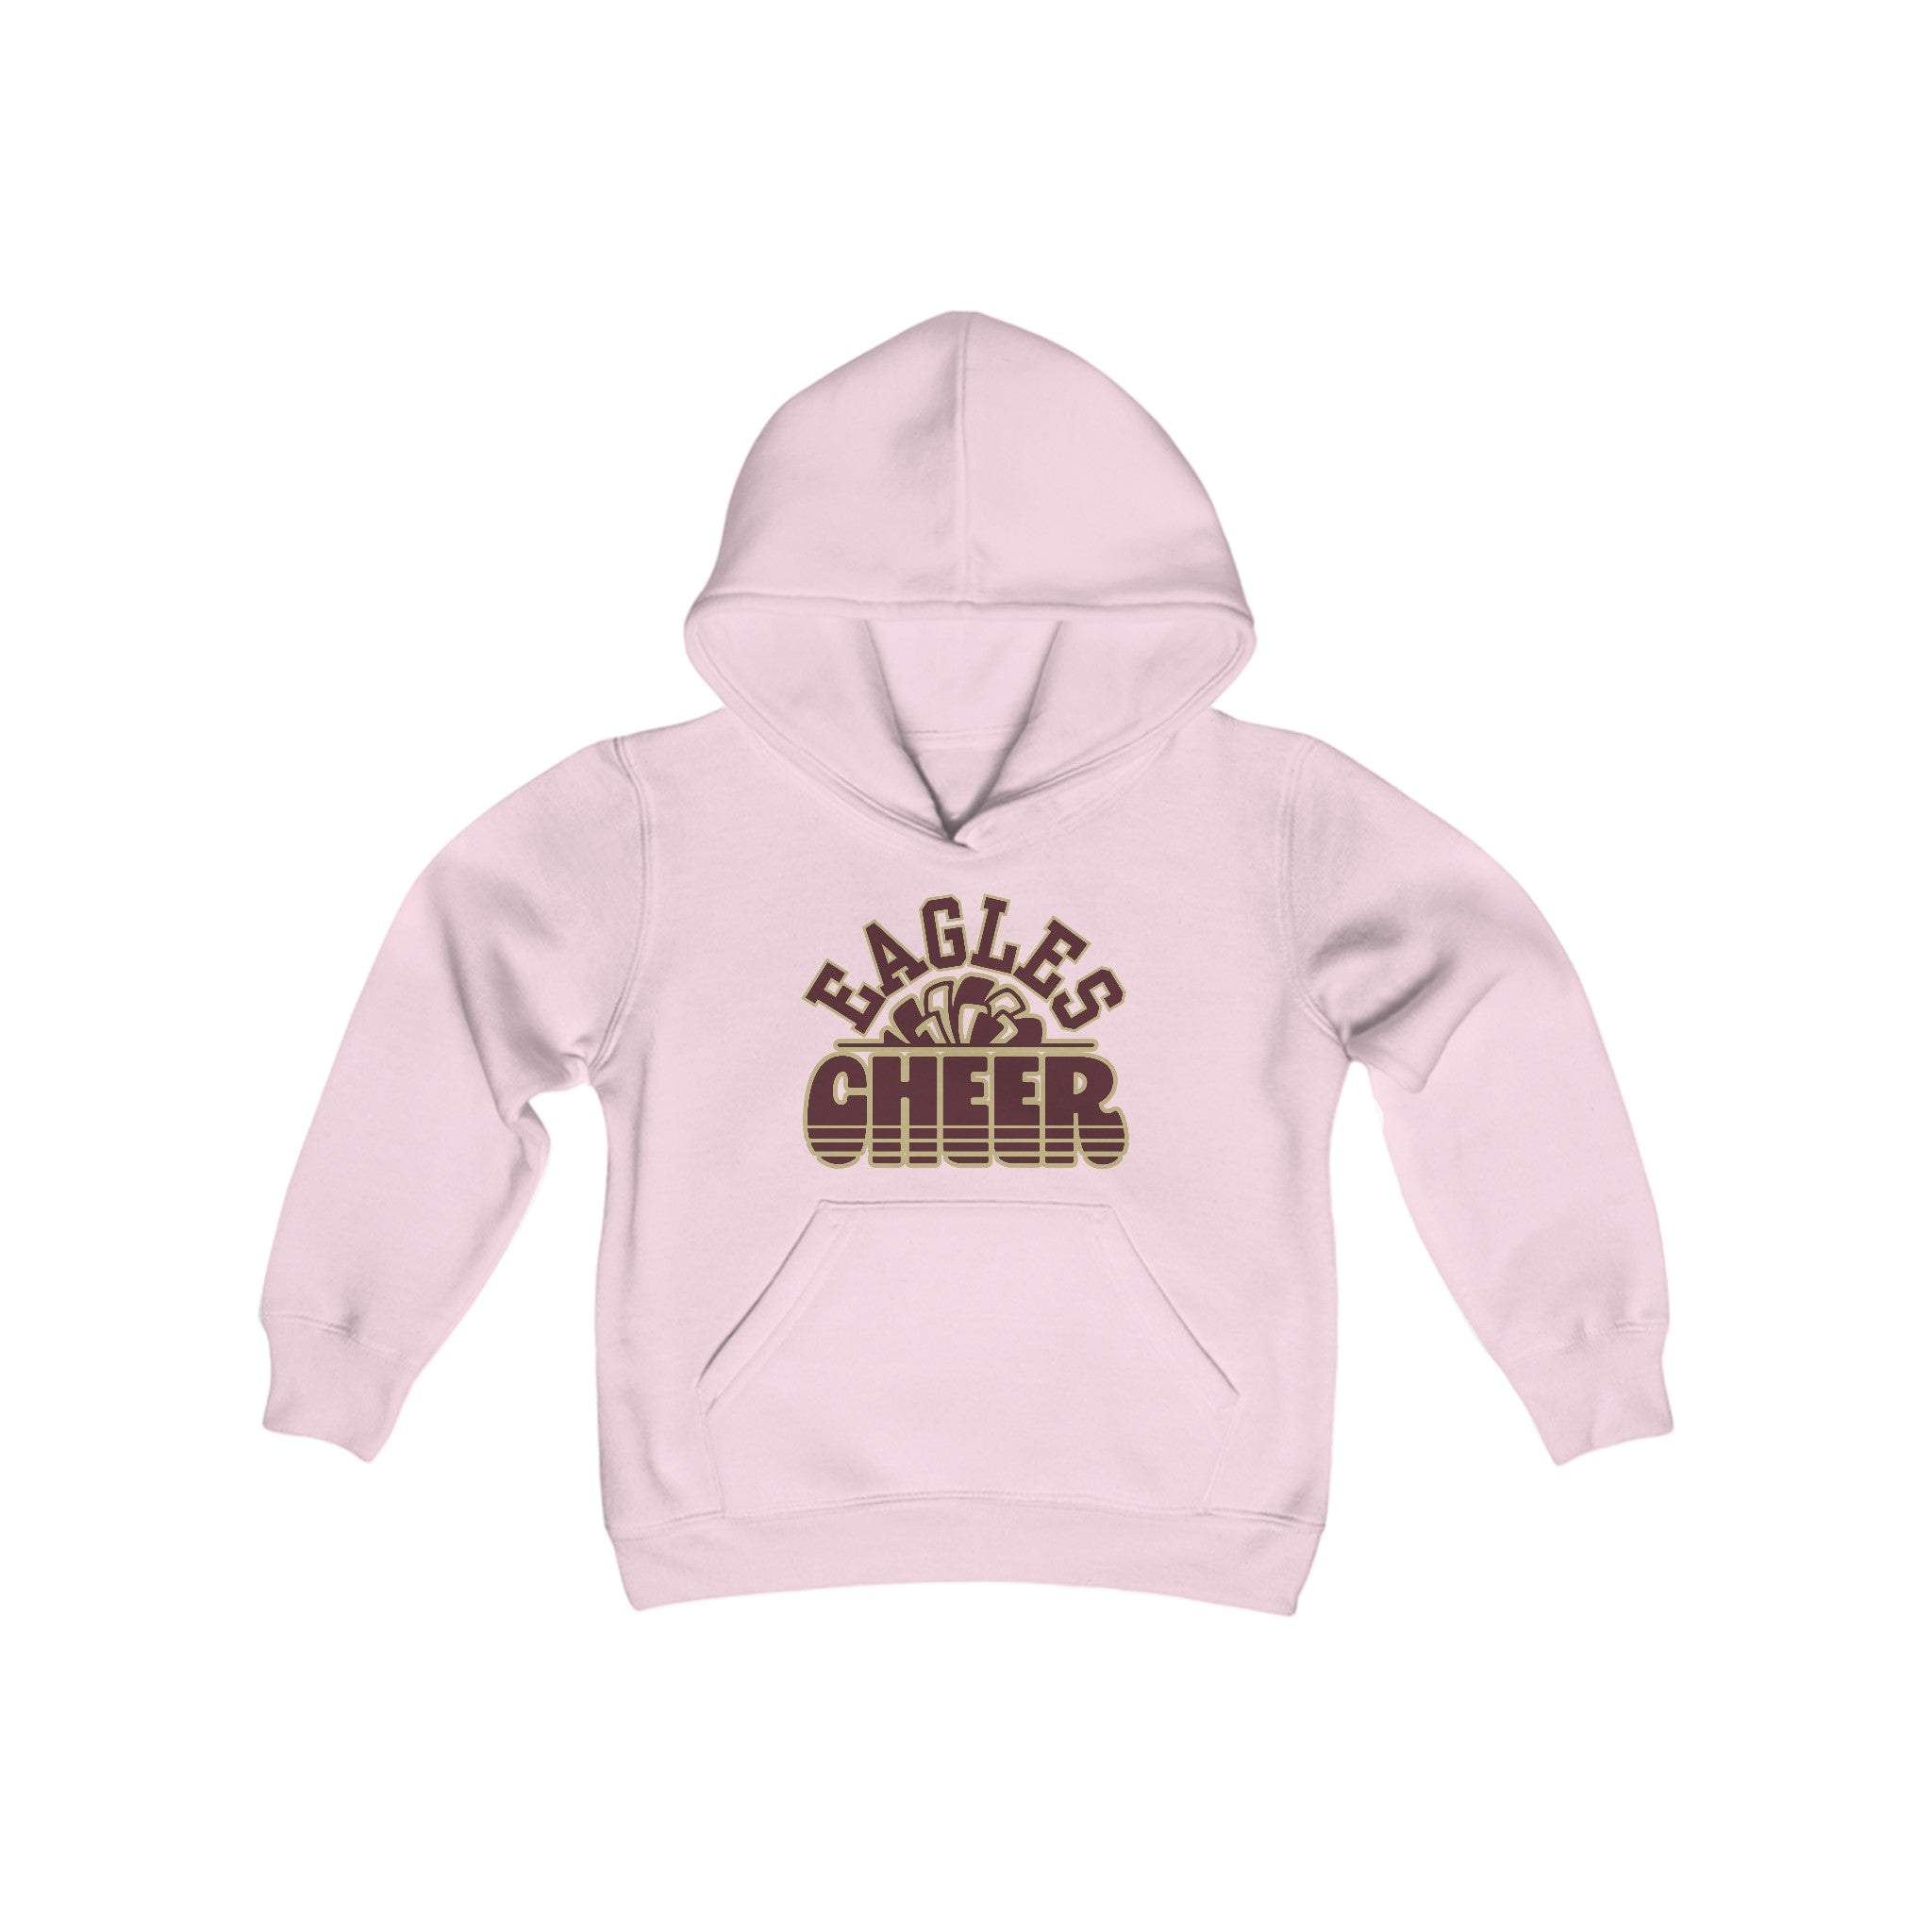 Youth Eagles Cheer Graphic Hoodie - New Albany Eagles